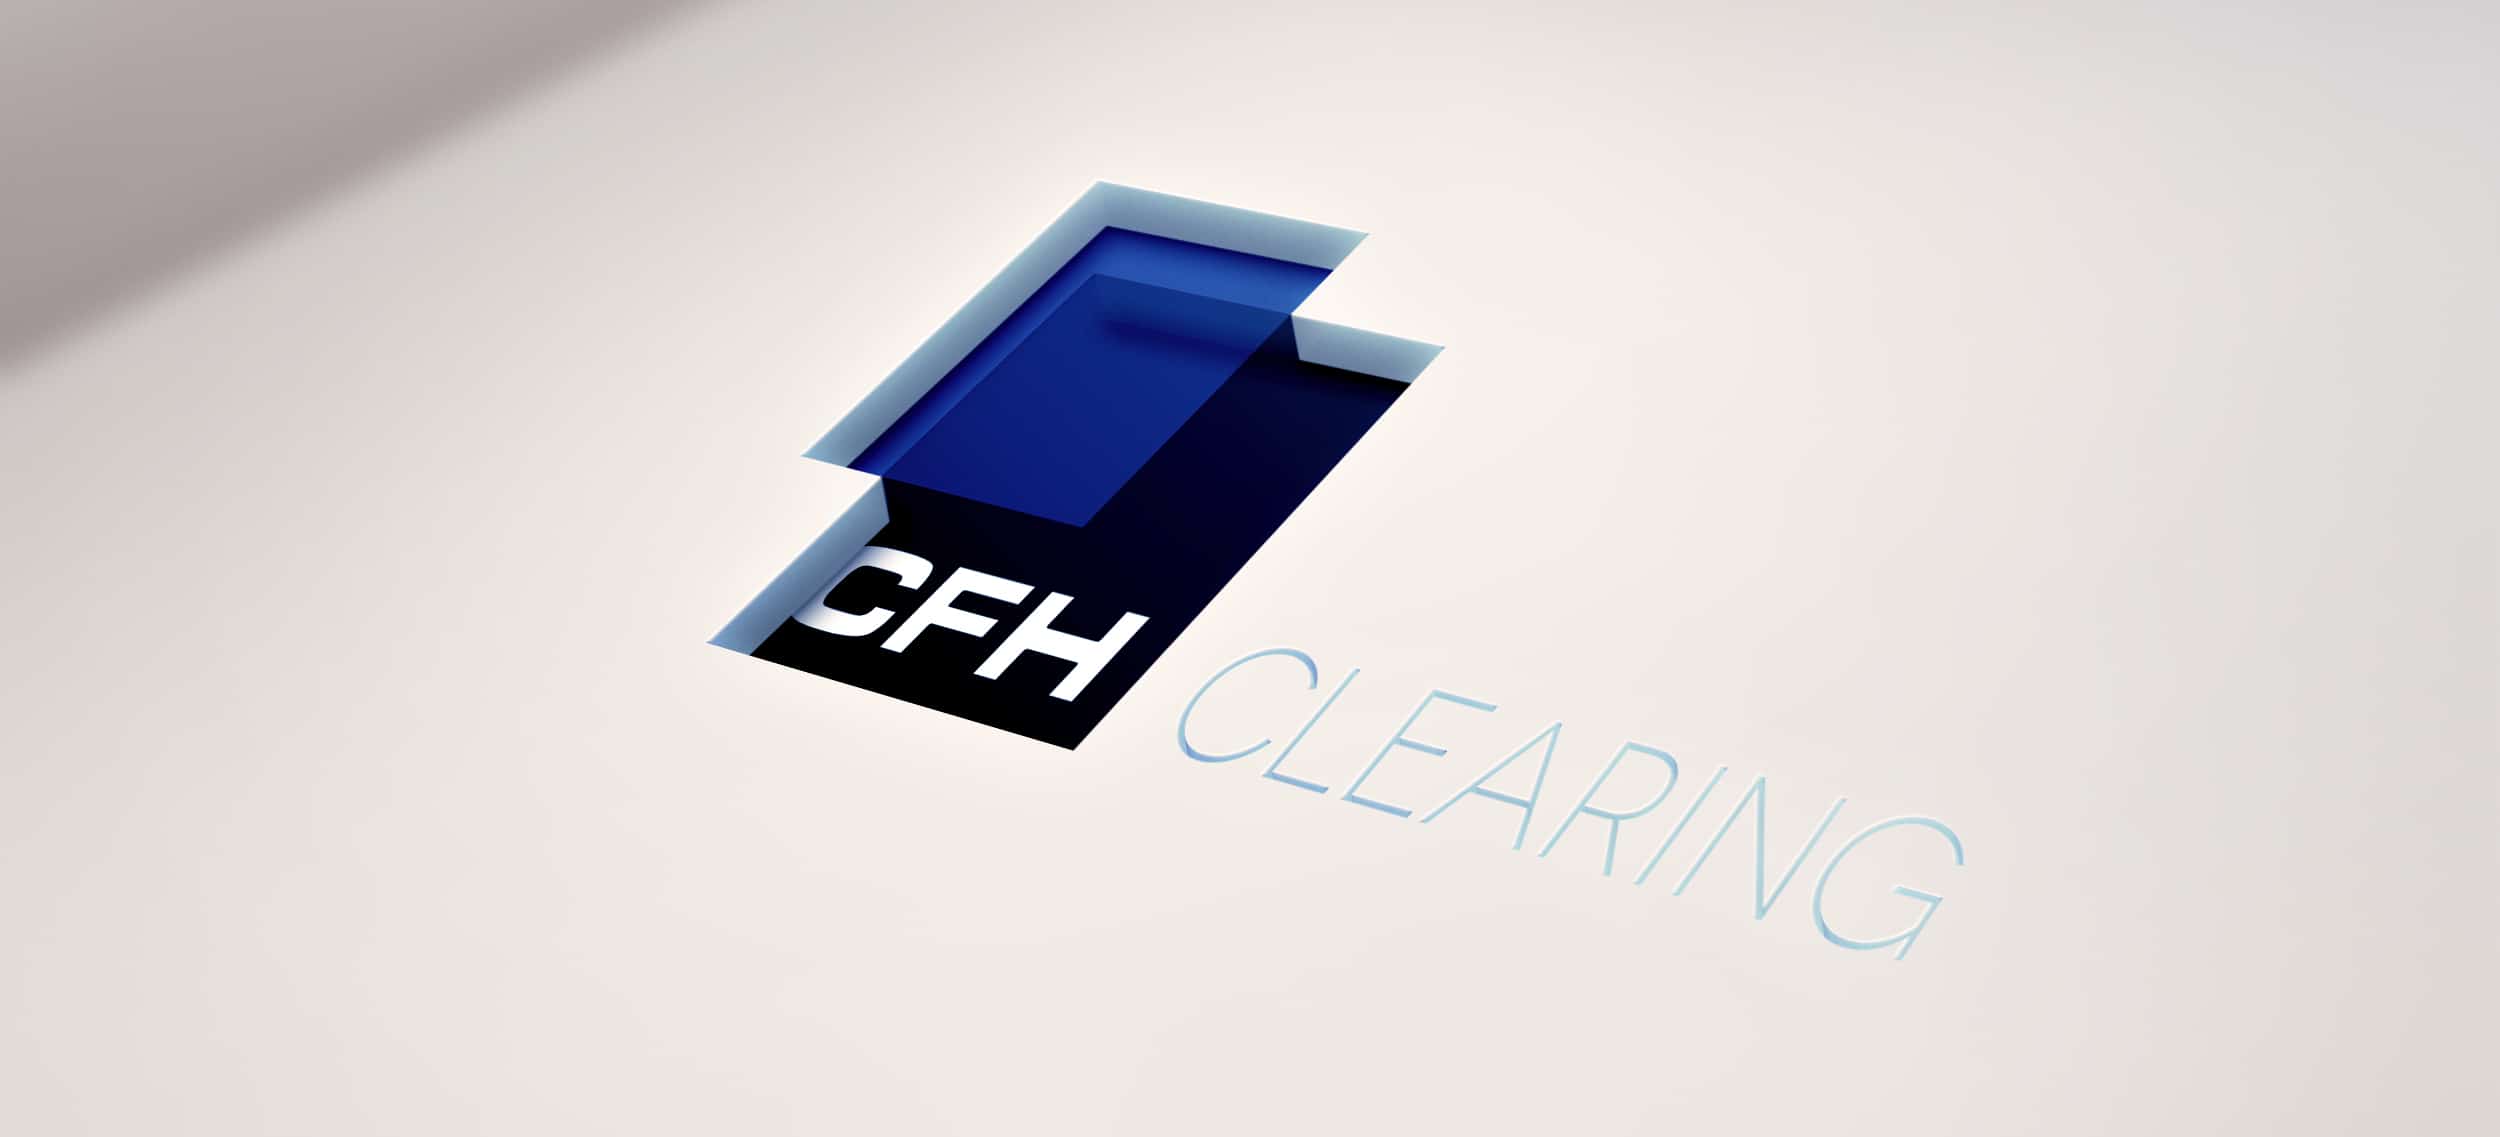 Japan's efx.com Partners with CFH Clearing to Offer New Trading Platforms